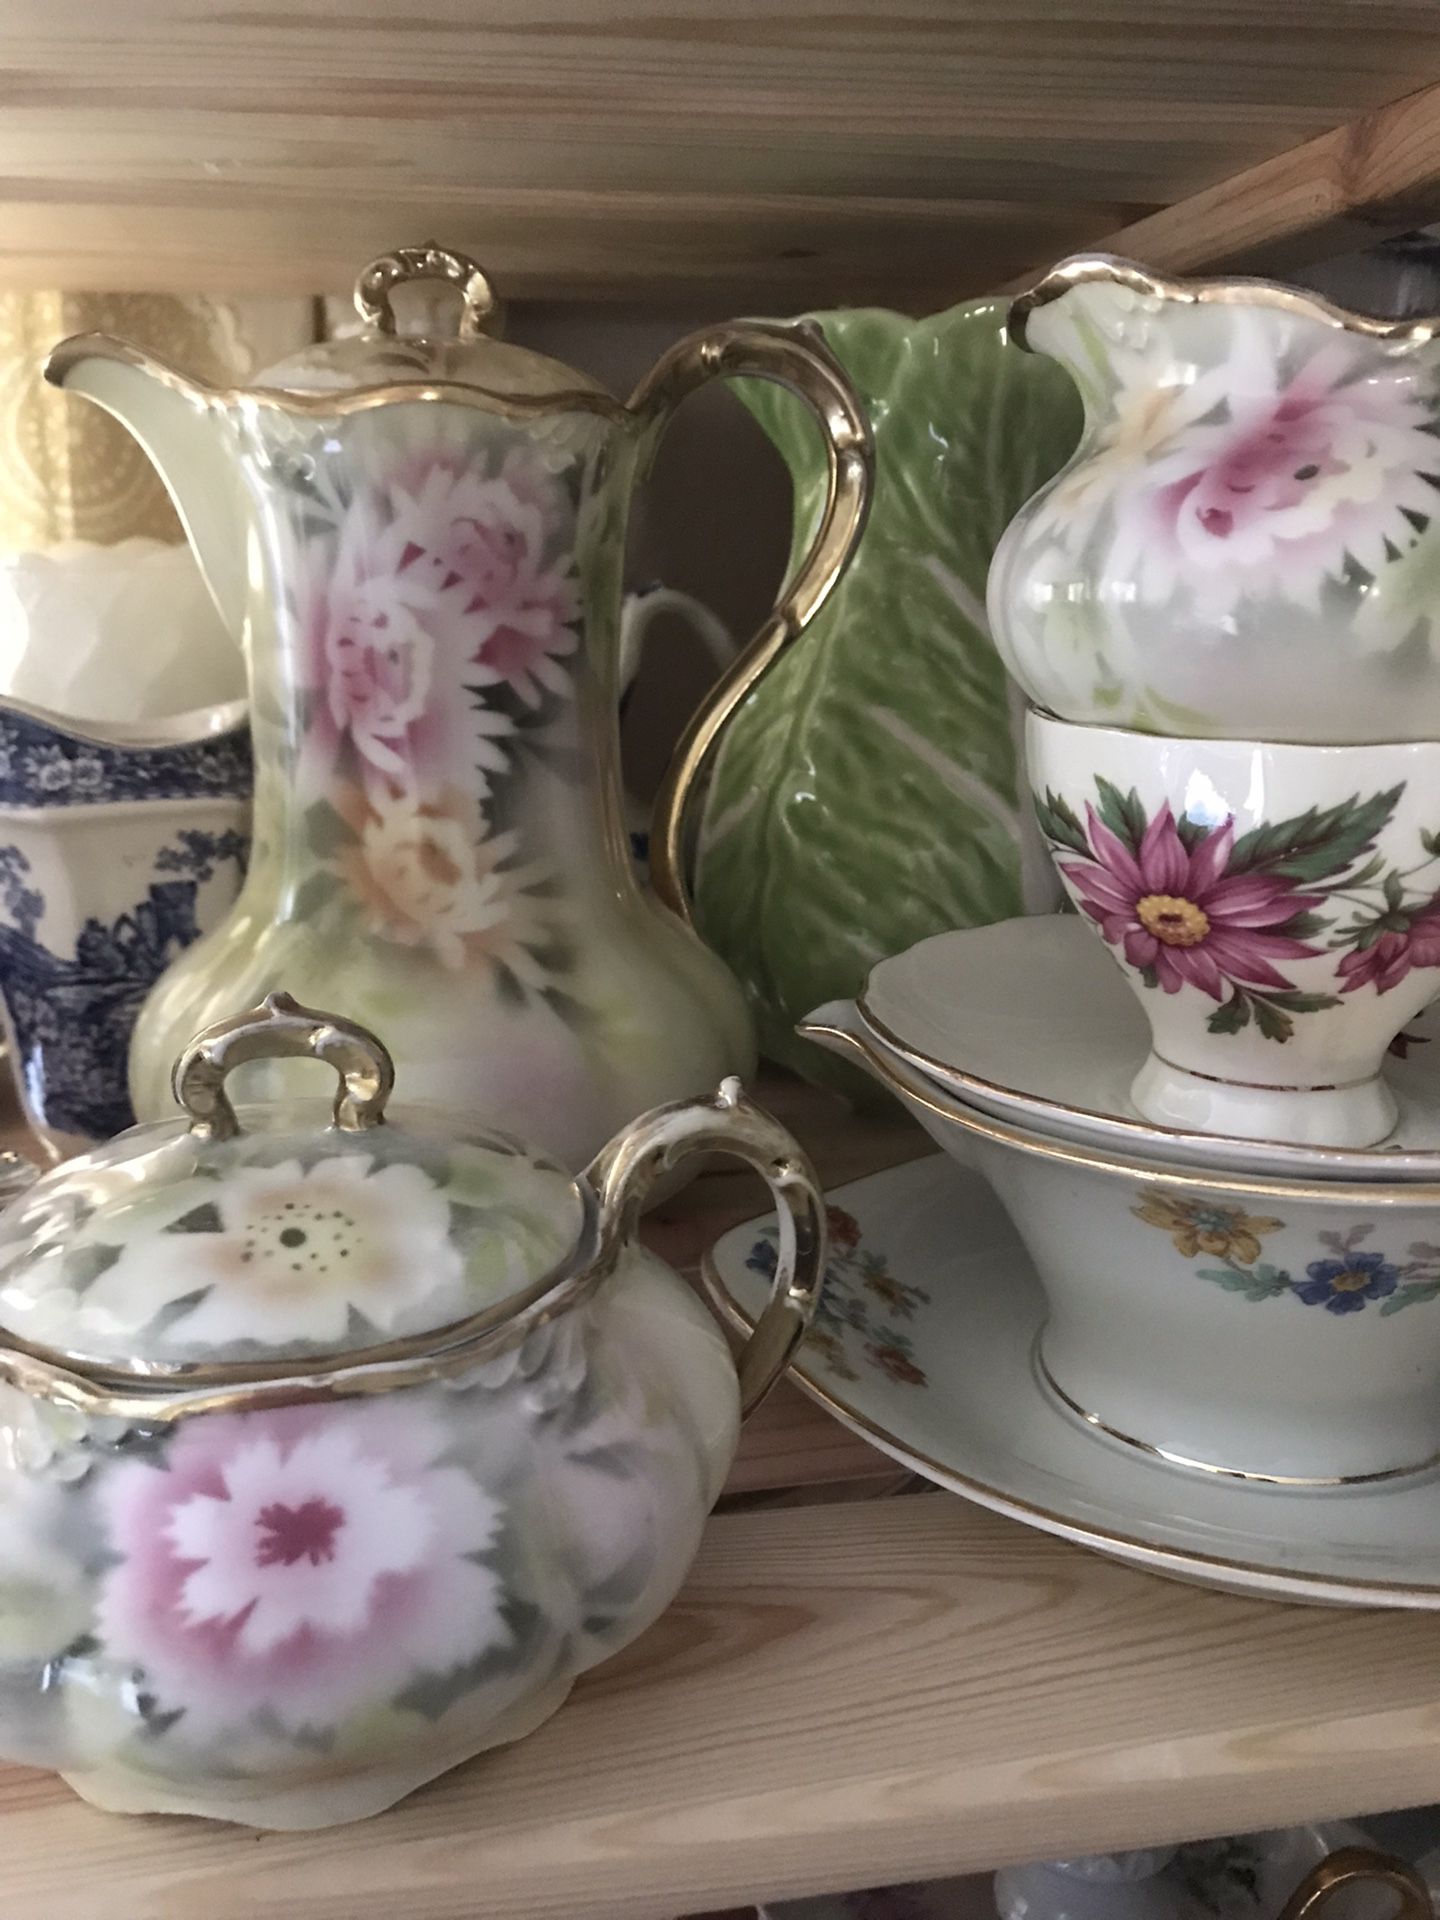 Vintage Dishes, Silverware & Teapots